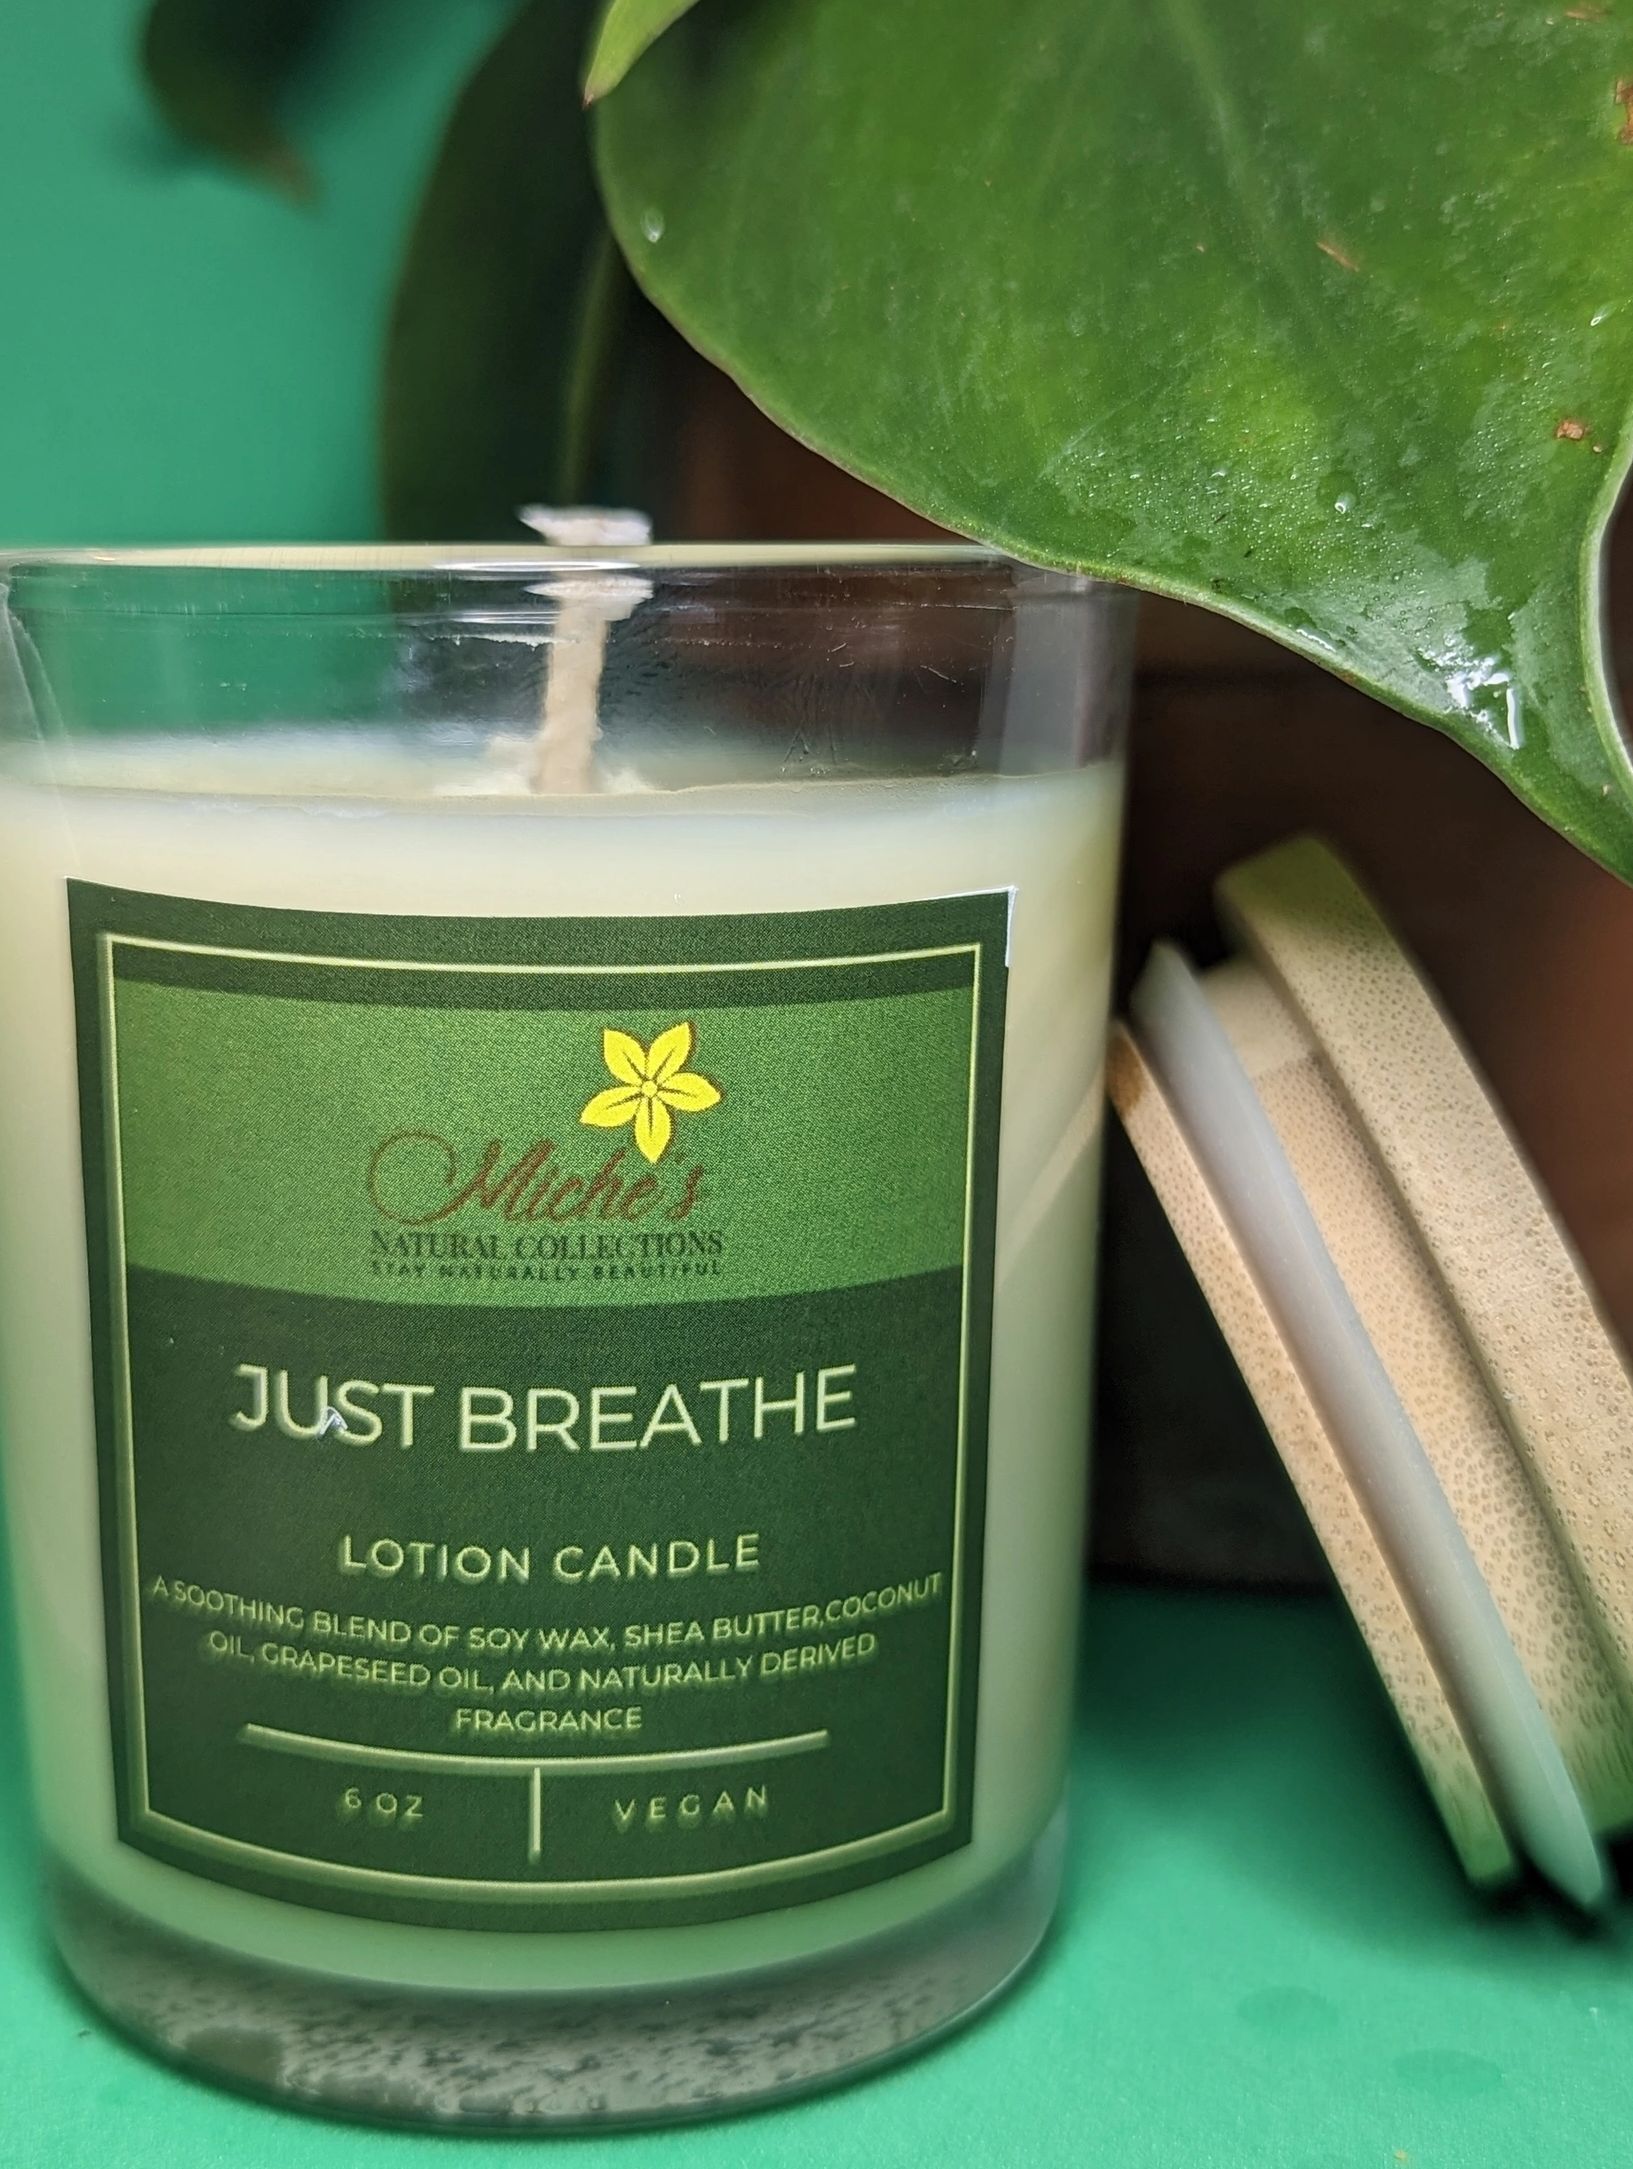 Just Breath Lotion Candle